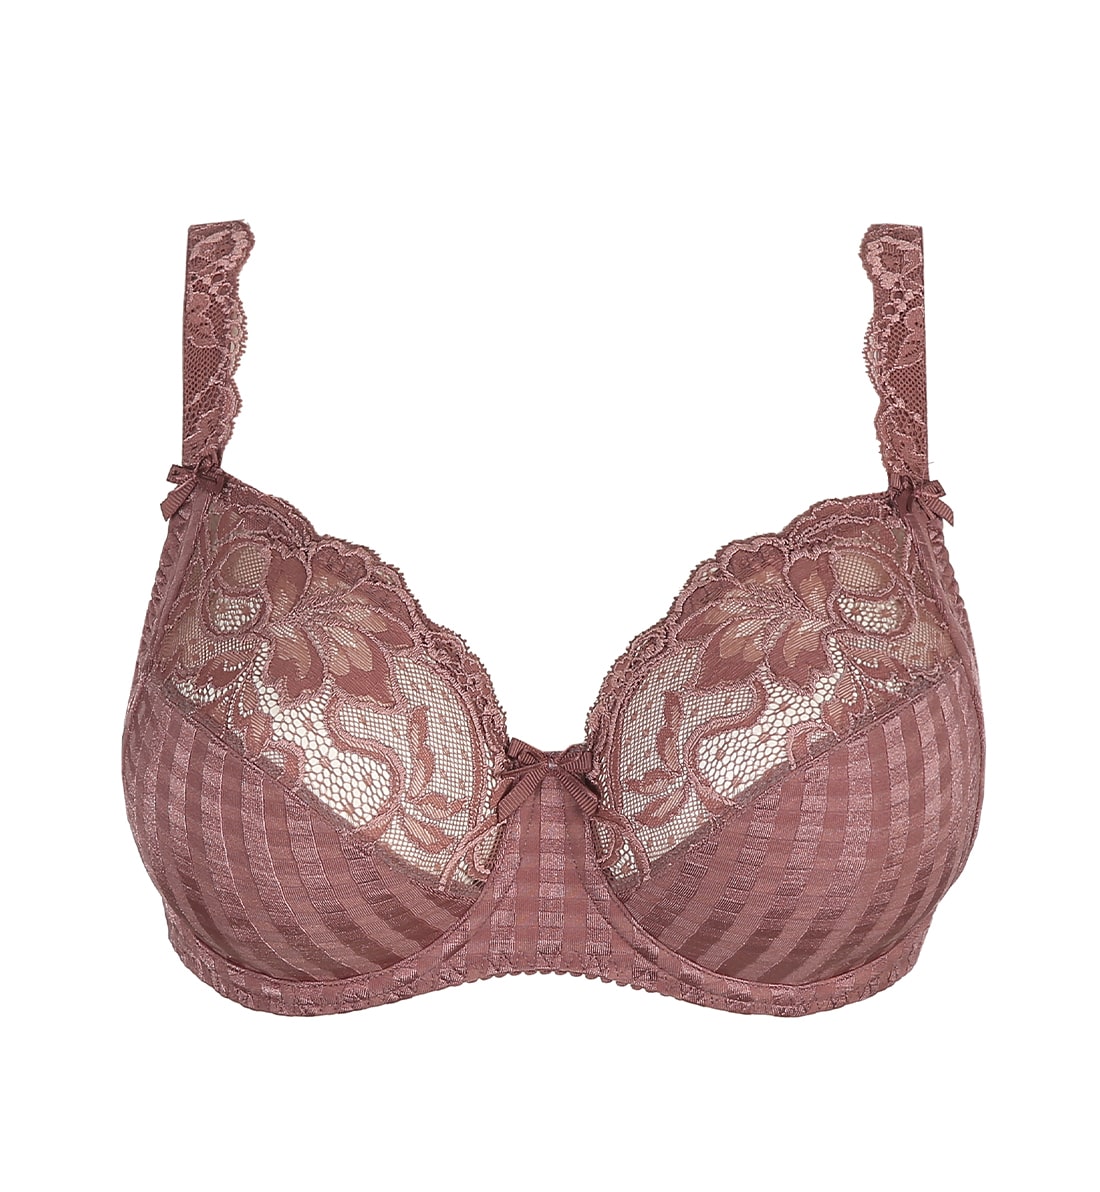 PrimaDonna Madison Full Cup Underwire Bra (0162120),32D,Satin Taupe - Satin Taupe,32D